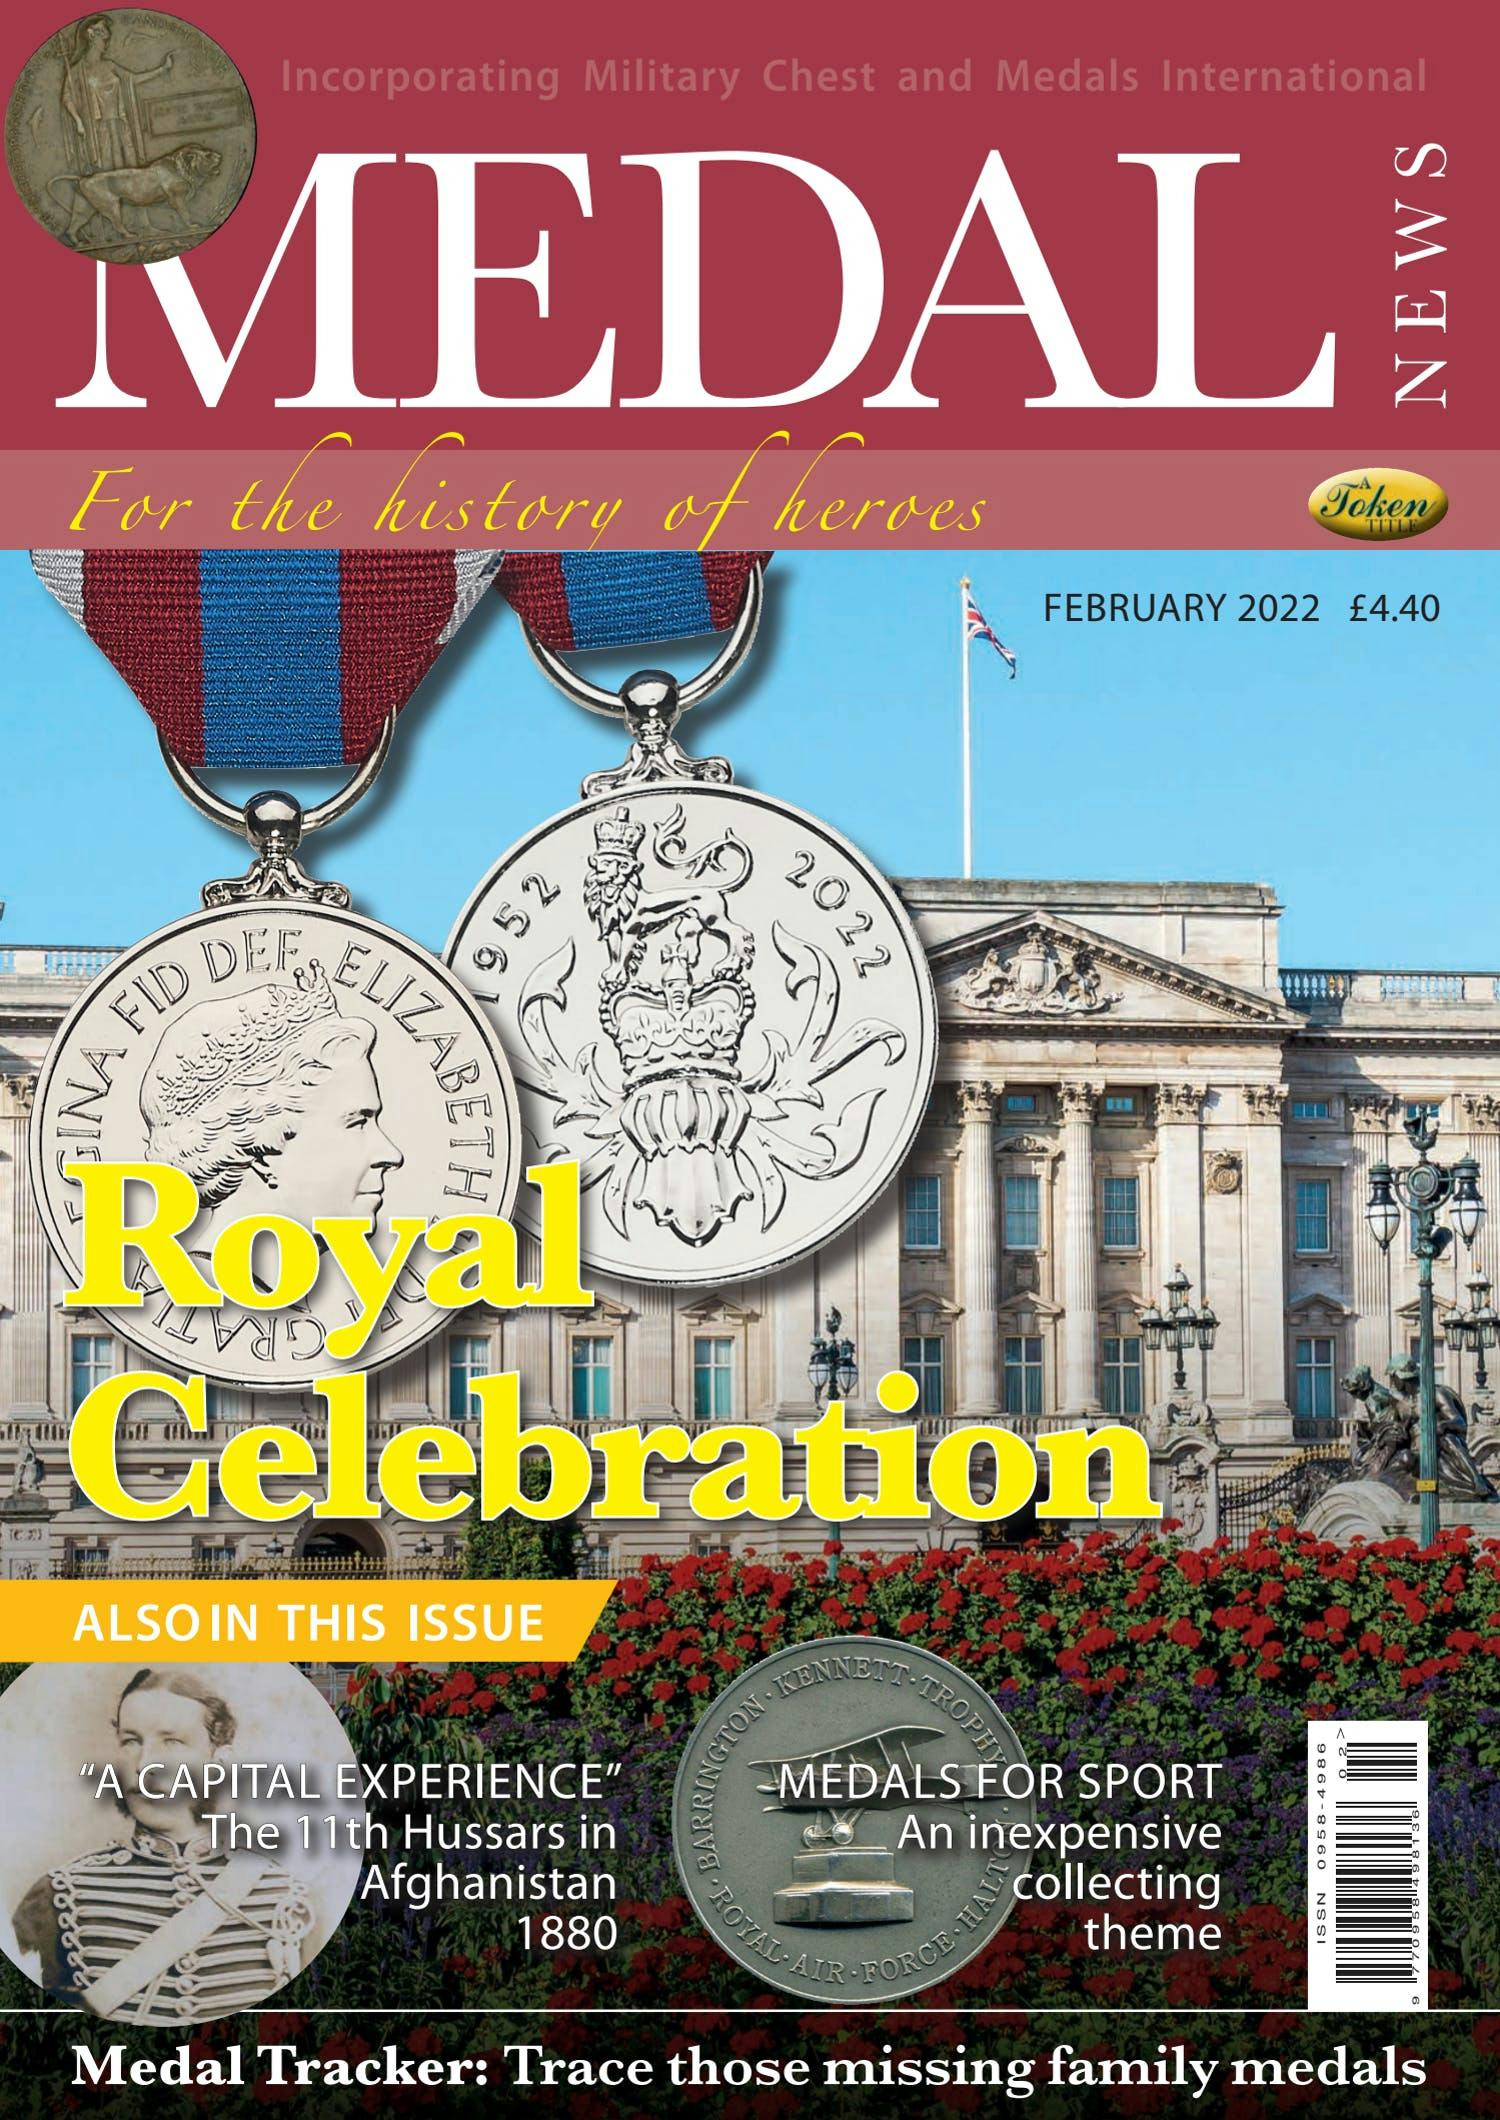 Front cover of 'Royal celebration', Medal News February 2022, Volume 60, Number 2 by Token Publishing